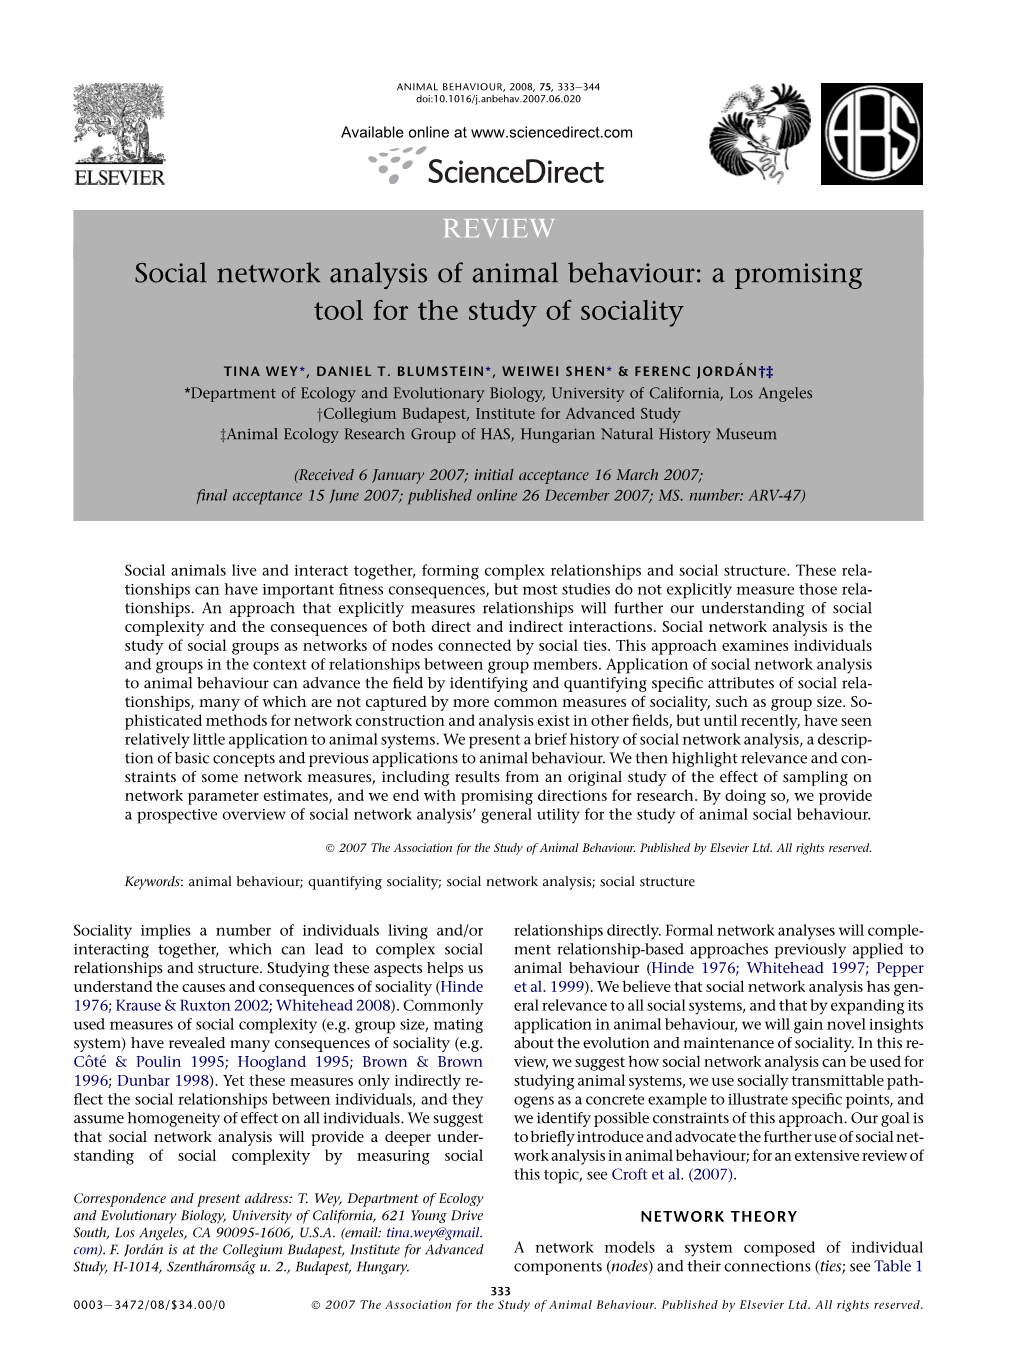 Social Network Analysis of Animal Behaviour: a Promising Tool for the Study of Sociality